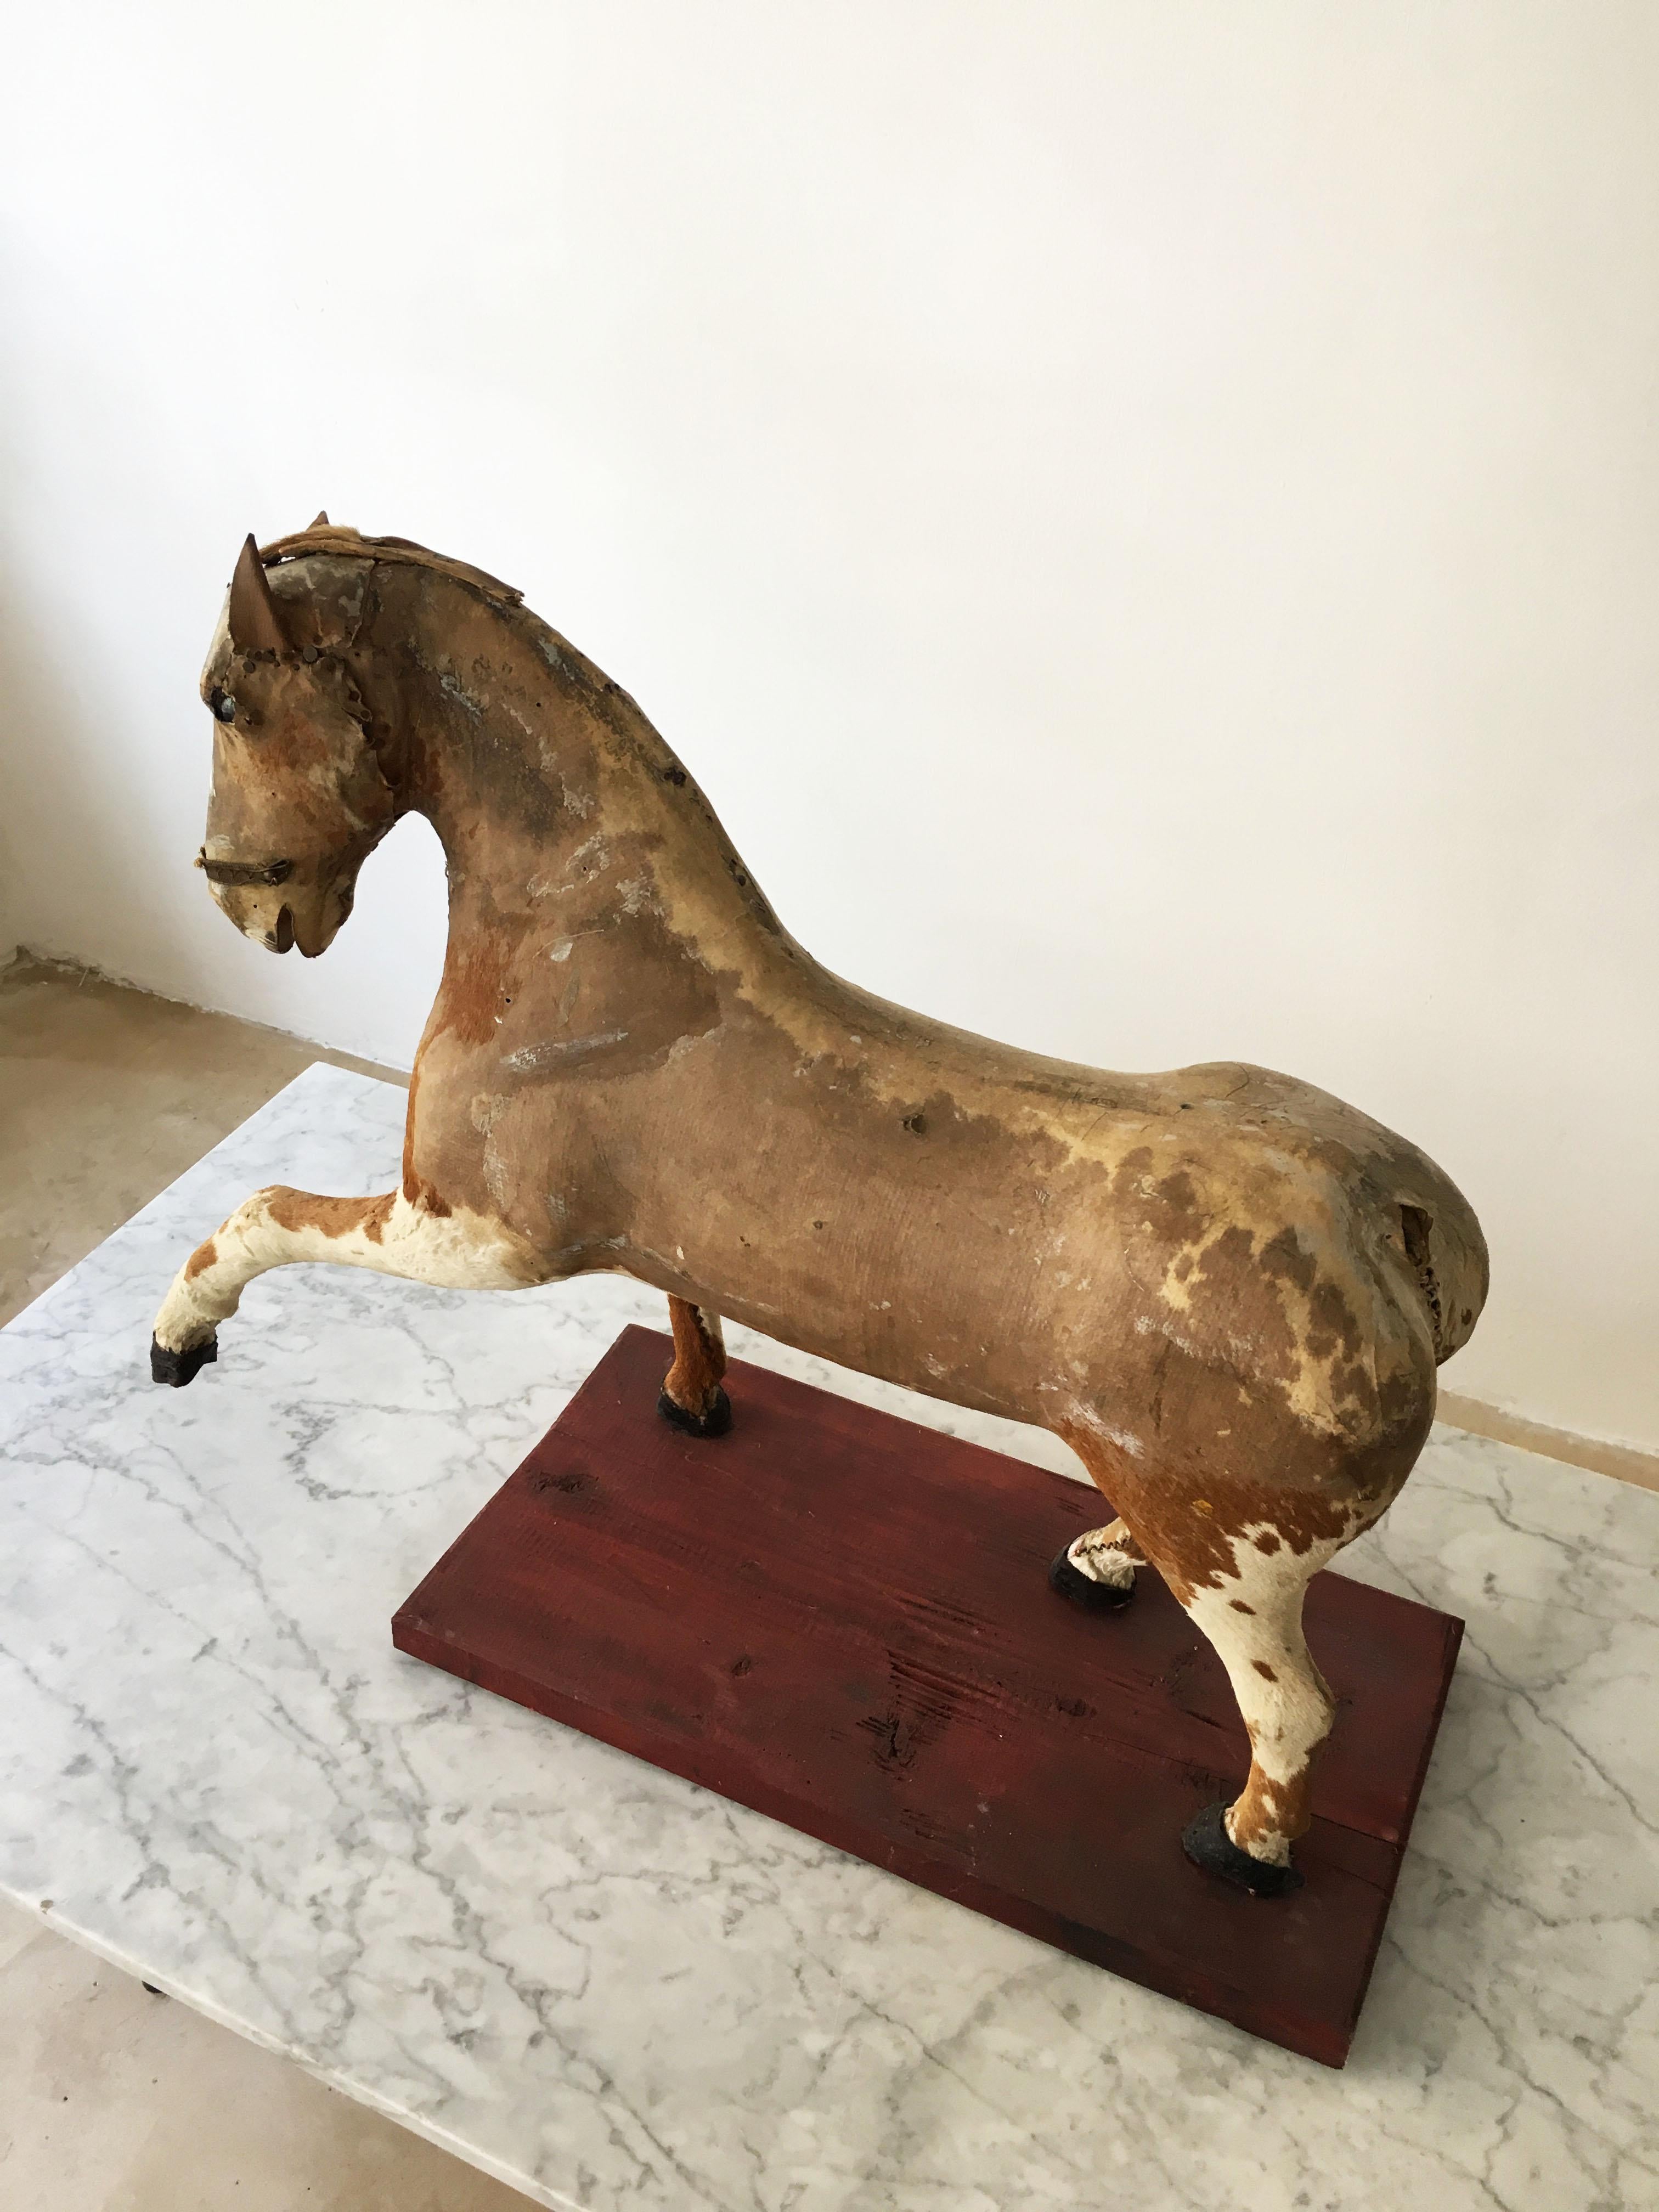 A stunningly beautiful decorative horse model object, France, early 20th century. Standing on a painted wood base, the finely sculpted horse model might have been a children toy in it's past life. We love the weathered look and feel, giving it an